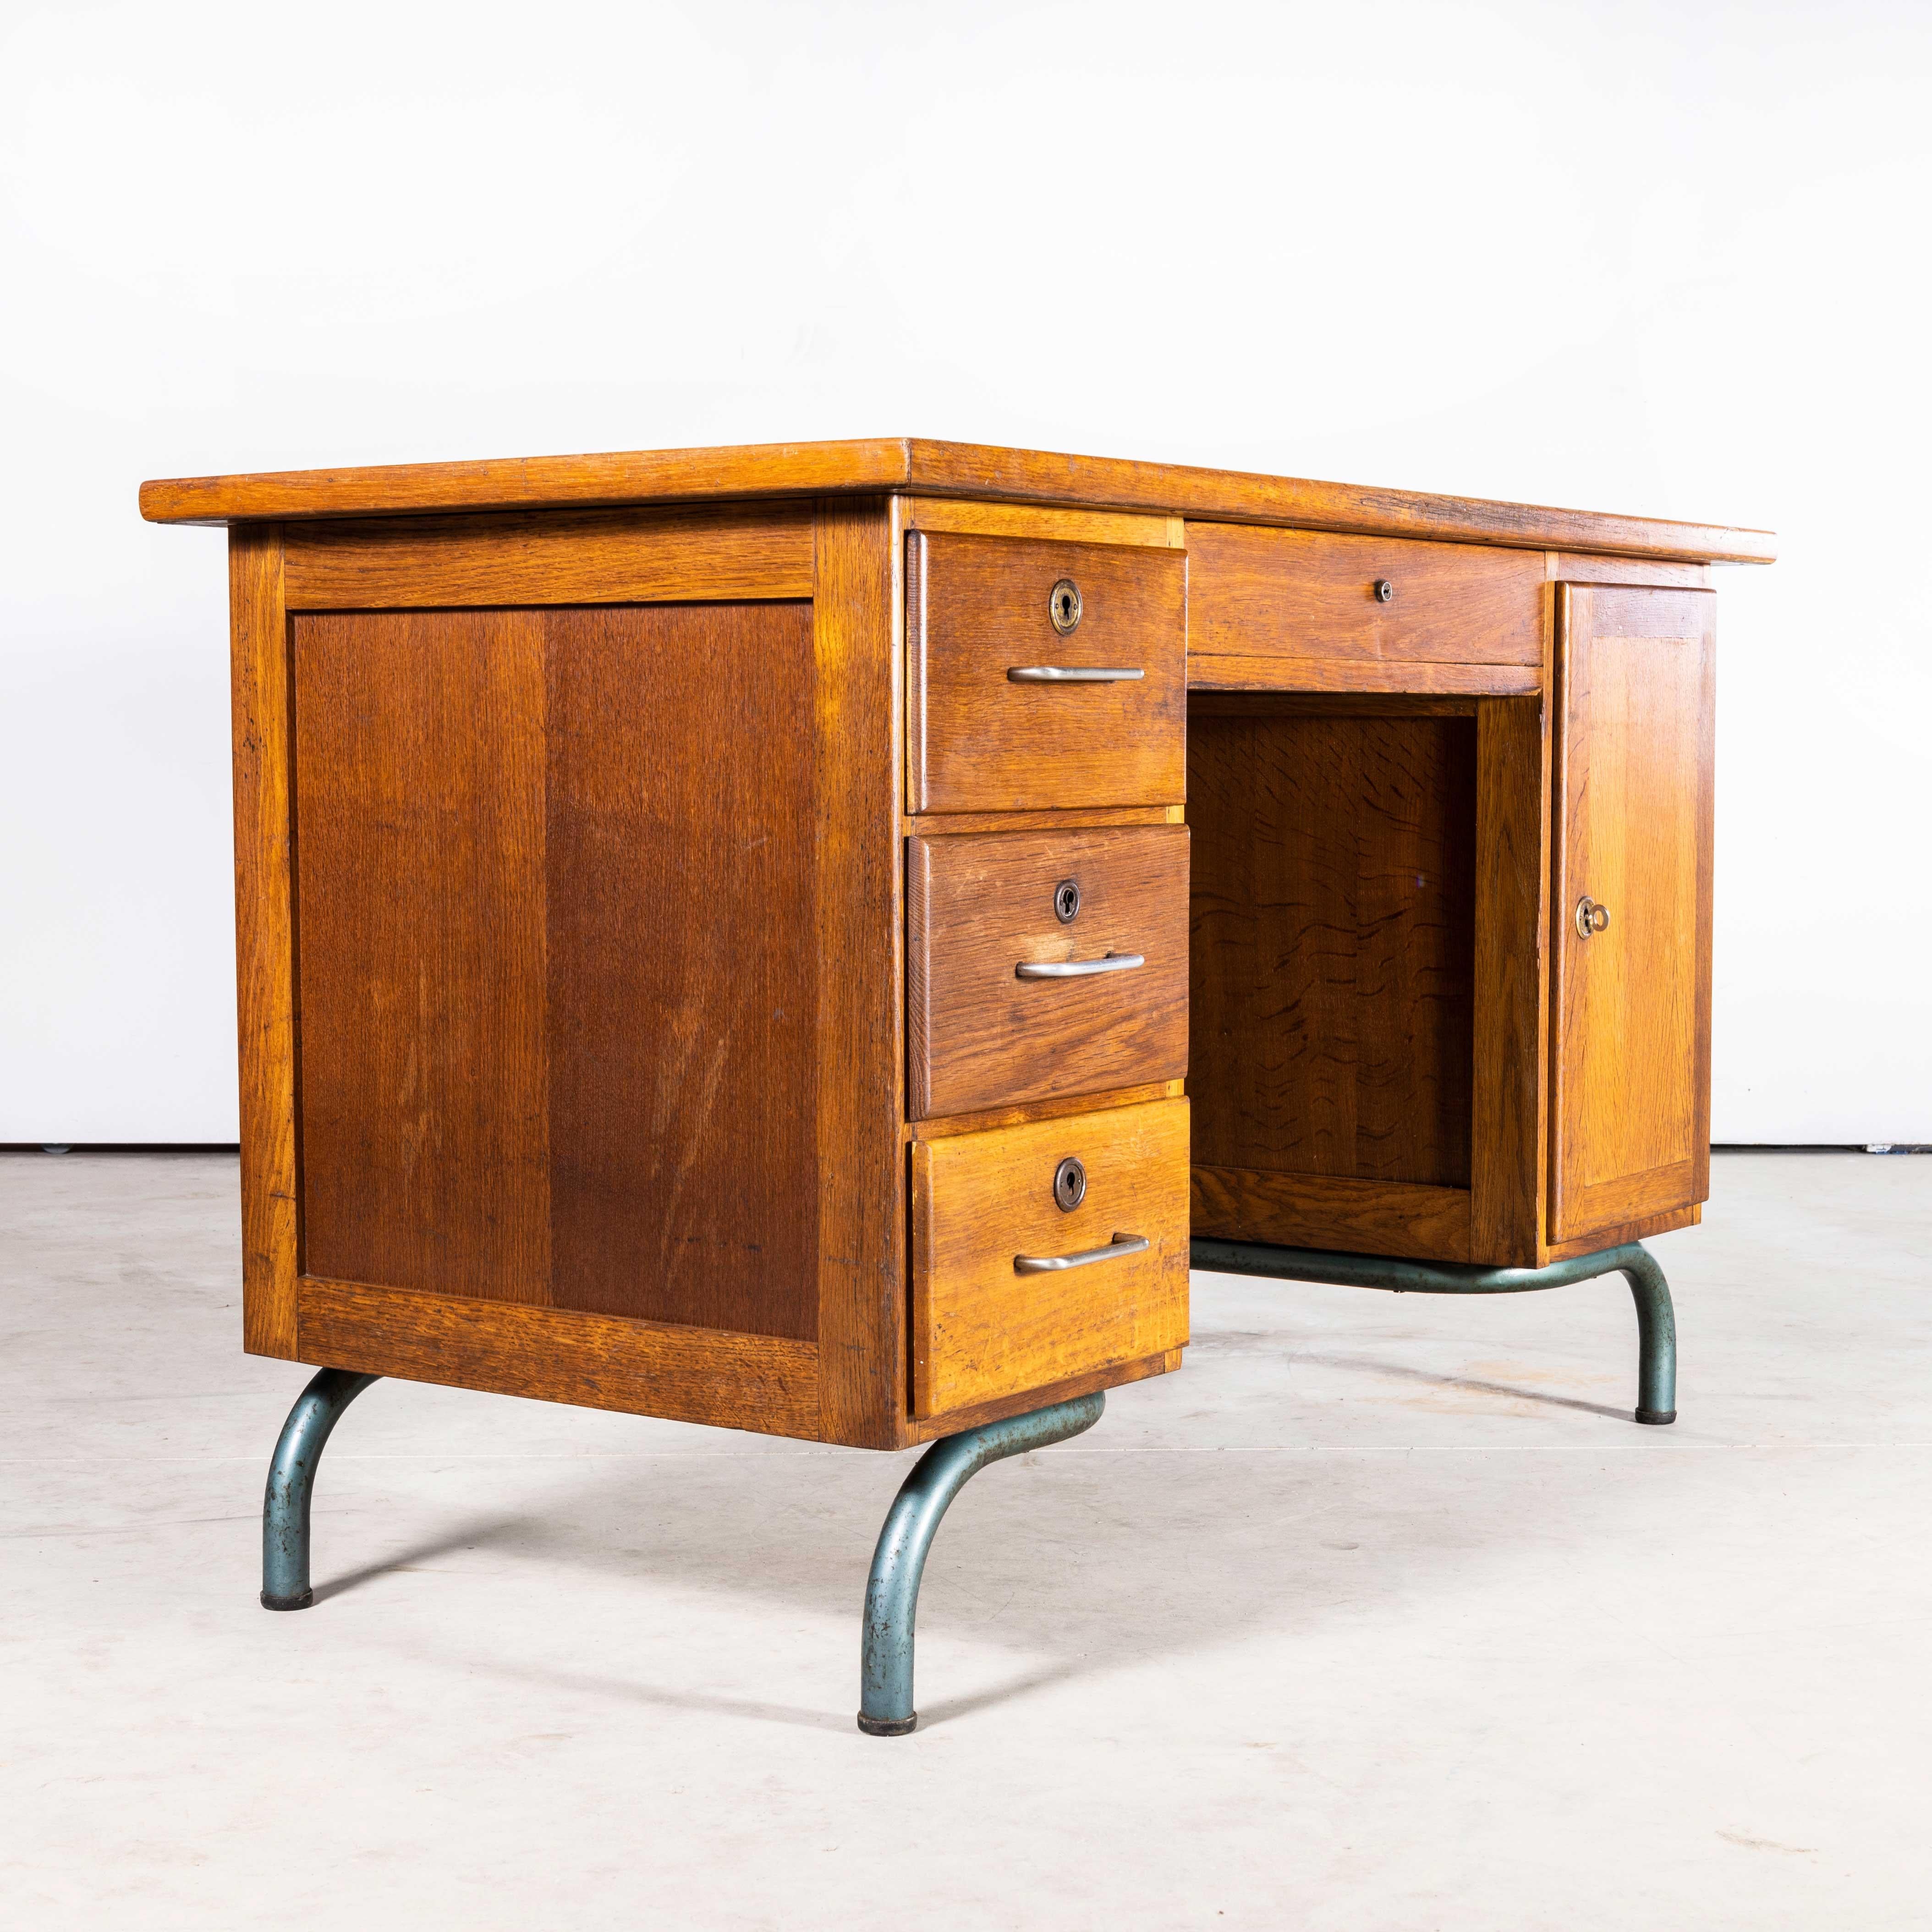 1950s Original French Mullca Panelled Desk
1950s Original French Mullca Panelled Desk. One of our most favourite makers, in 1947 Robert Muller and Gaston Cavaillon created the company that went on to develop arguably the most famous French school